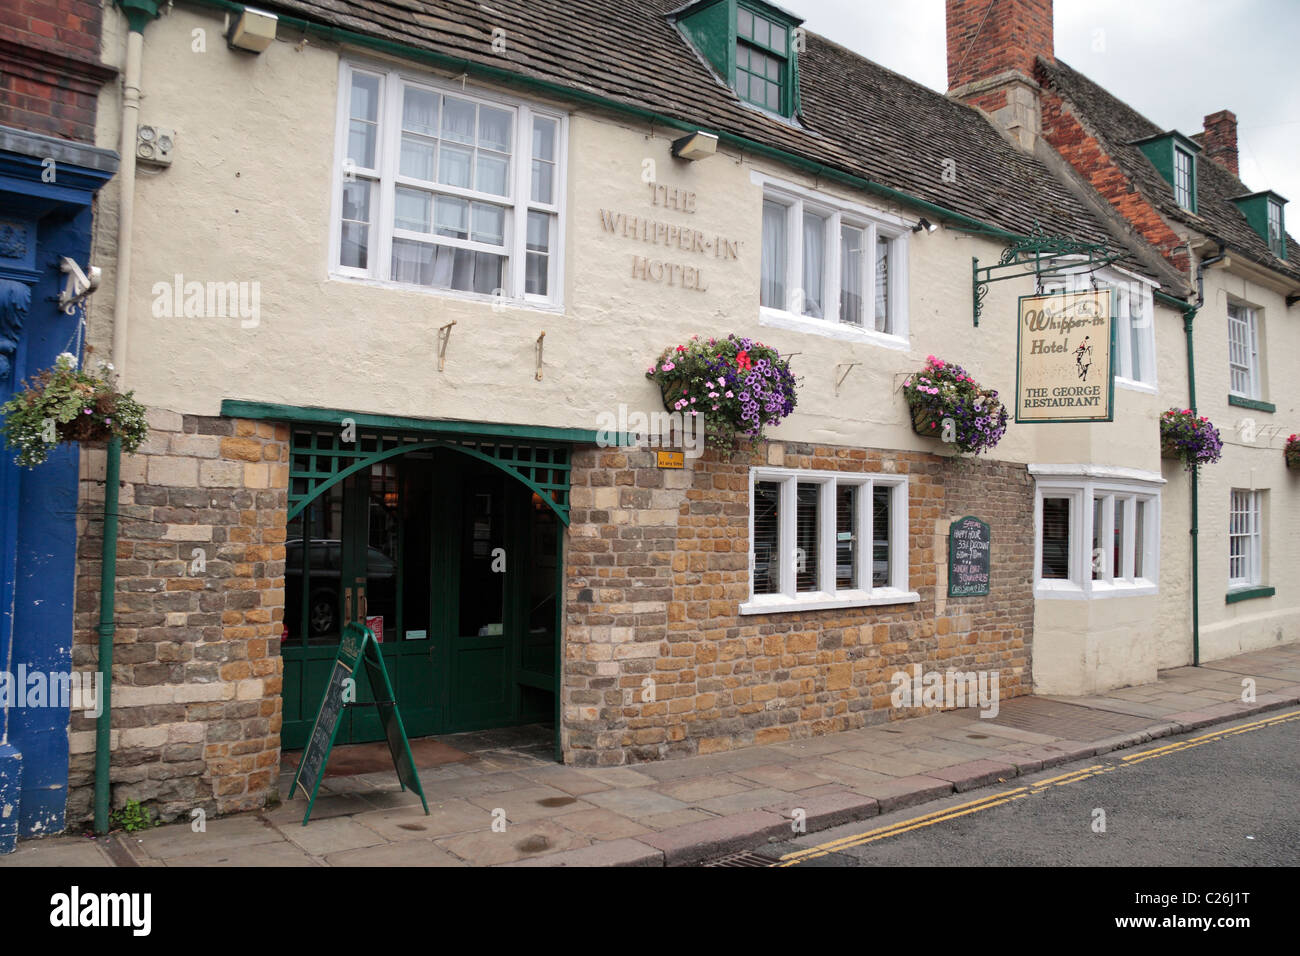 The Whipper In Hotel in Oakham, County town of Rutland, England. Stock Photo